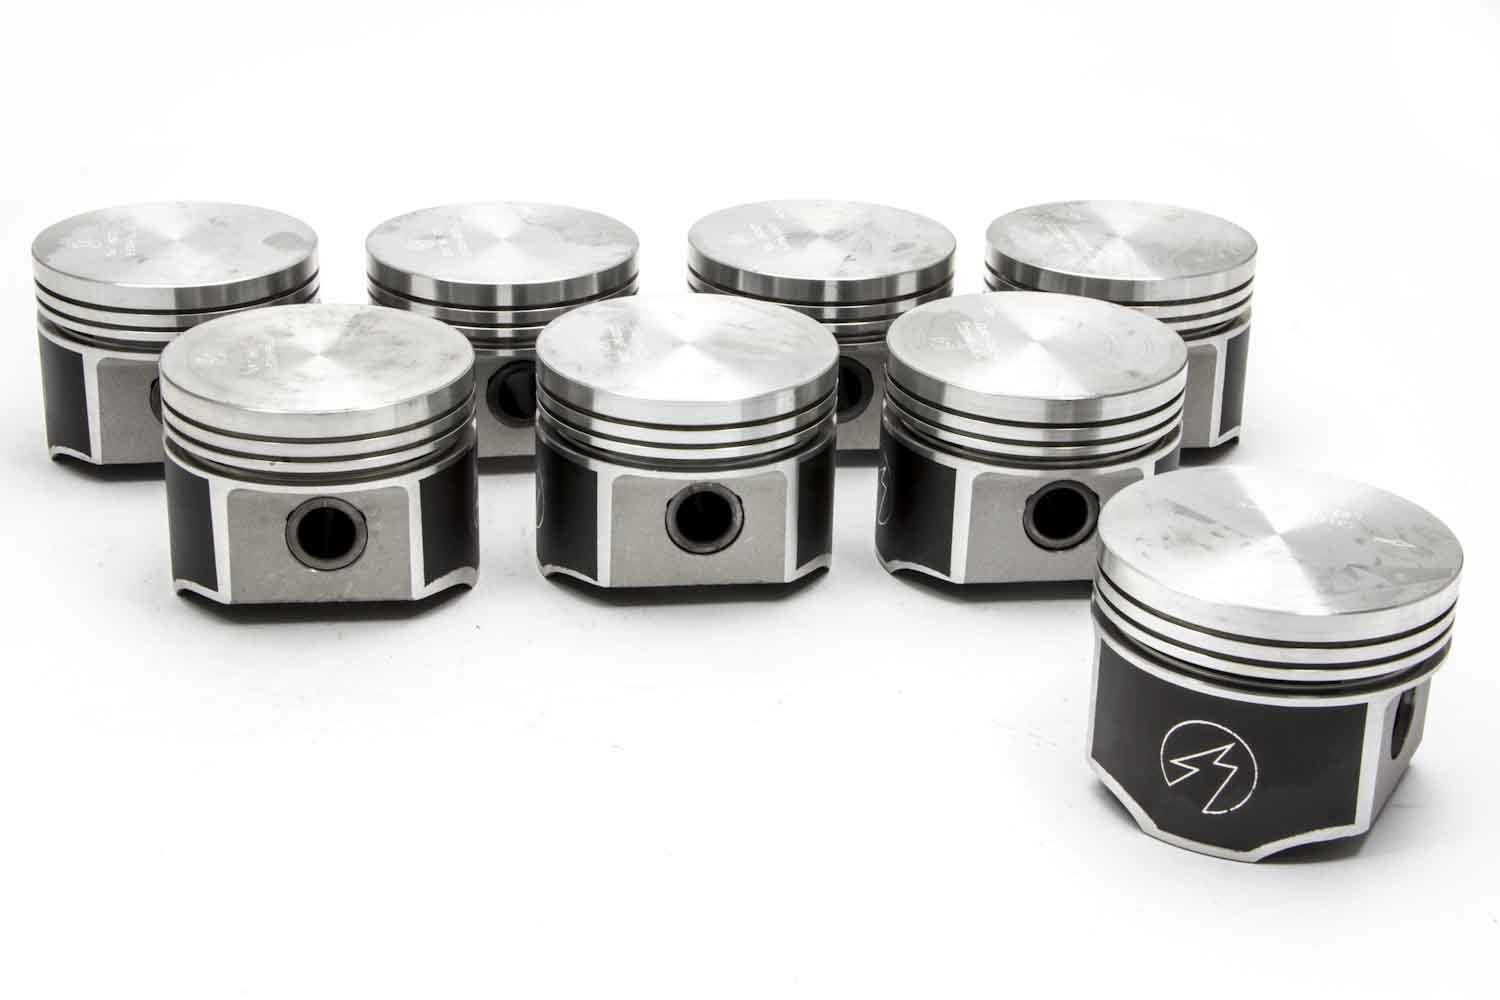 Sealed Power L2315NF30 Piston, Speed Pro, Forged, 4.280 in Bore, 5/64 x 5/64 x 3/16 in Ring Grooves, Plus 0.00 cc, Coated Skirt, Mopar B-Series, Set of 8